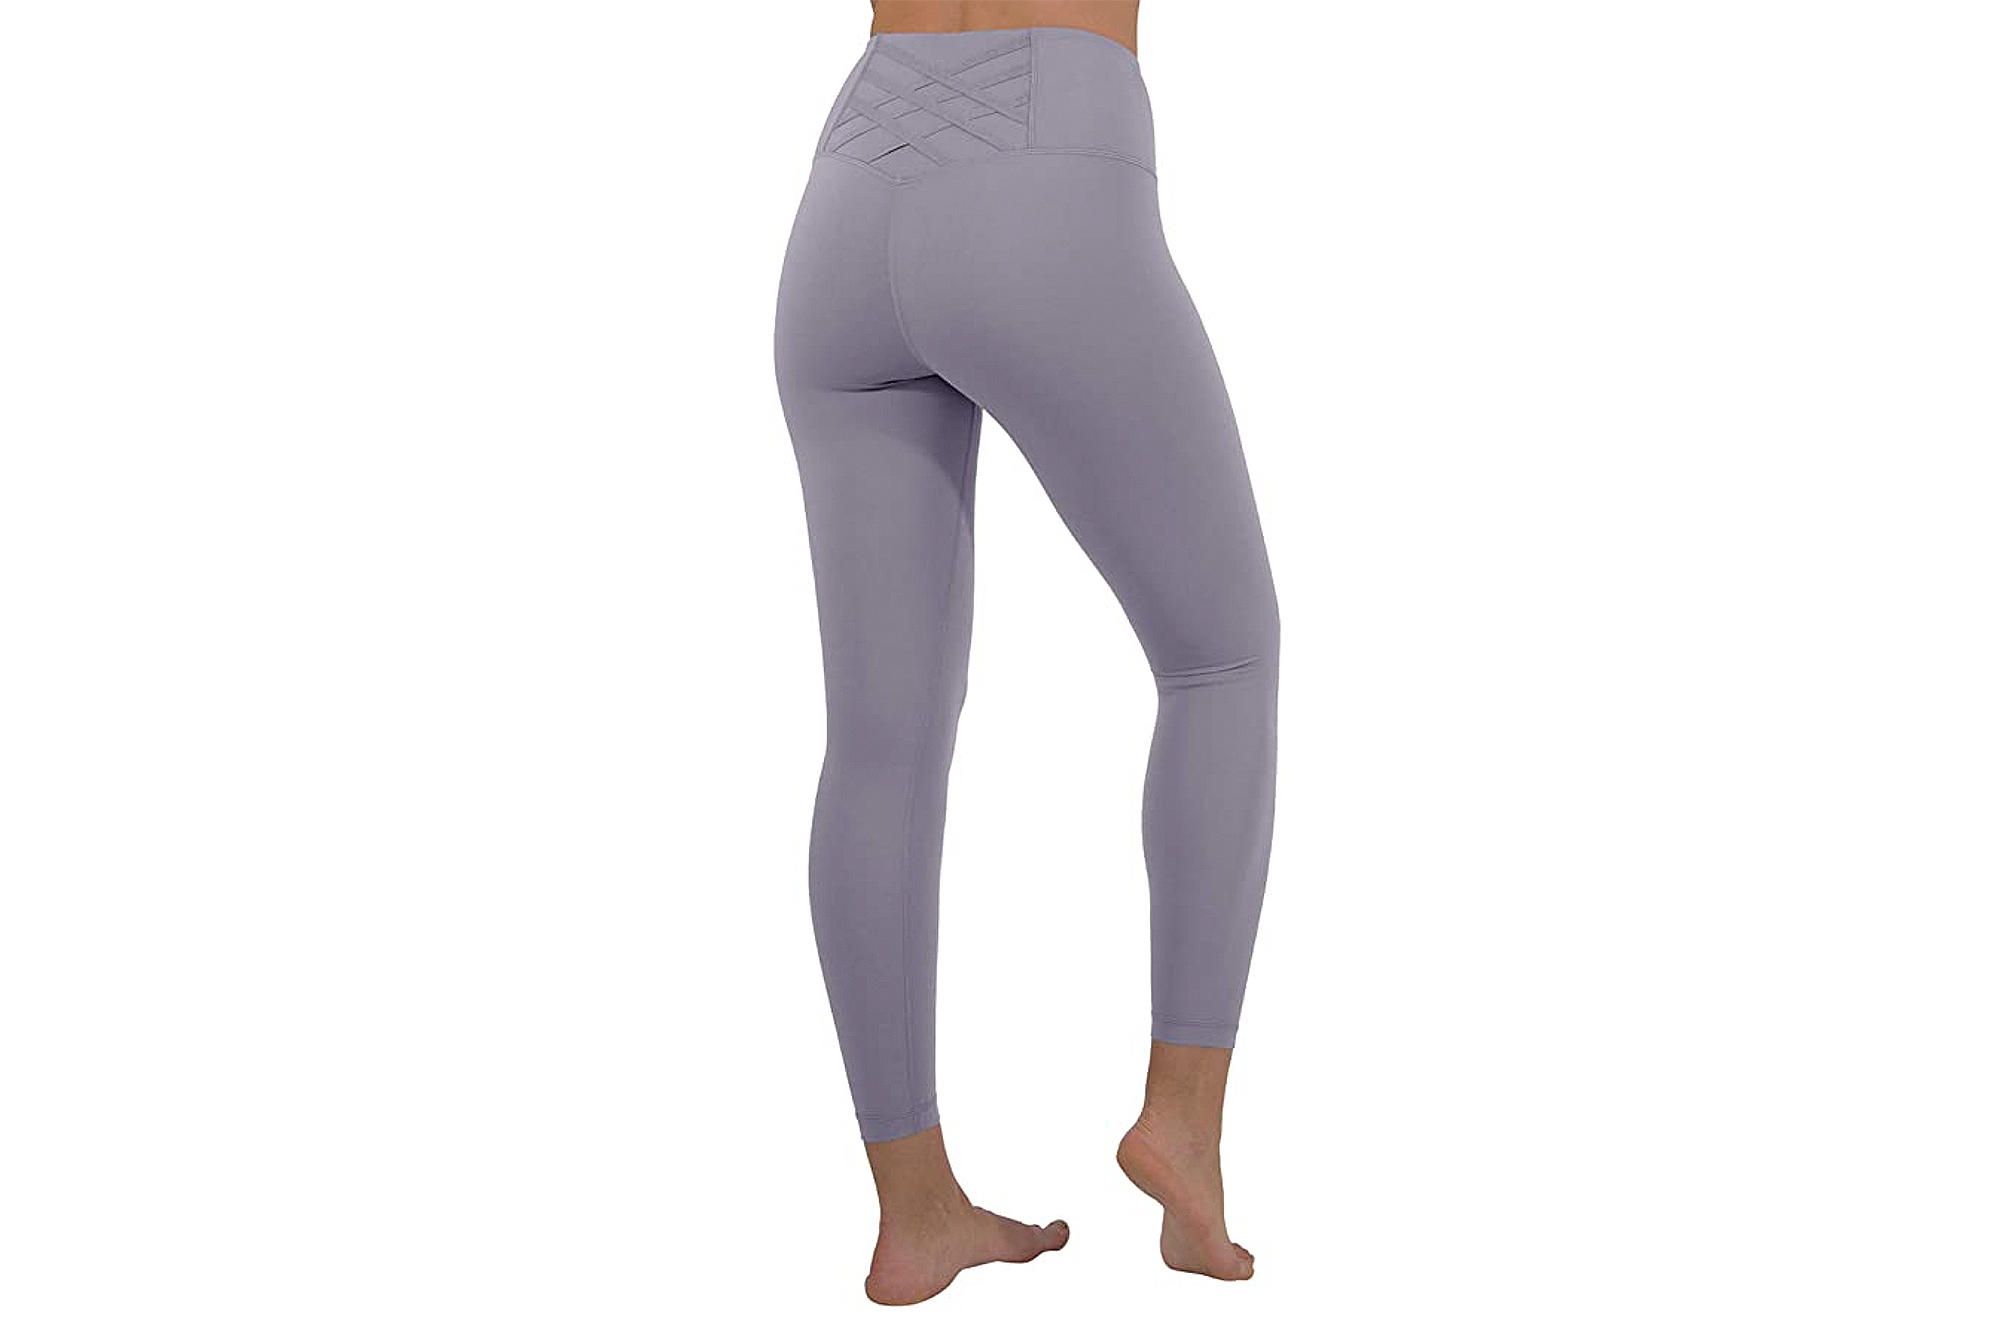 Are Yogalicious Leggings Squat Proofpoint